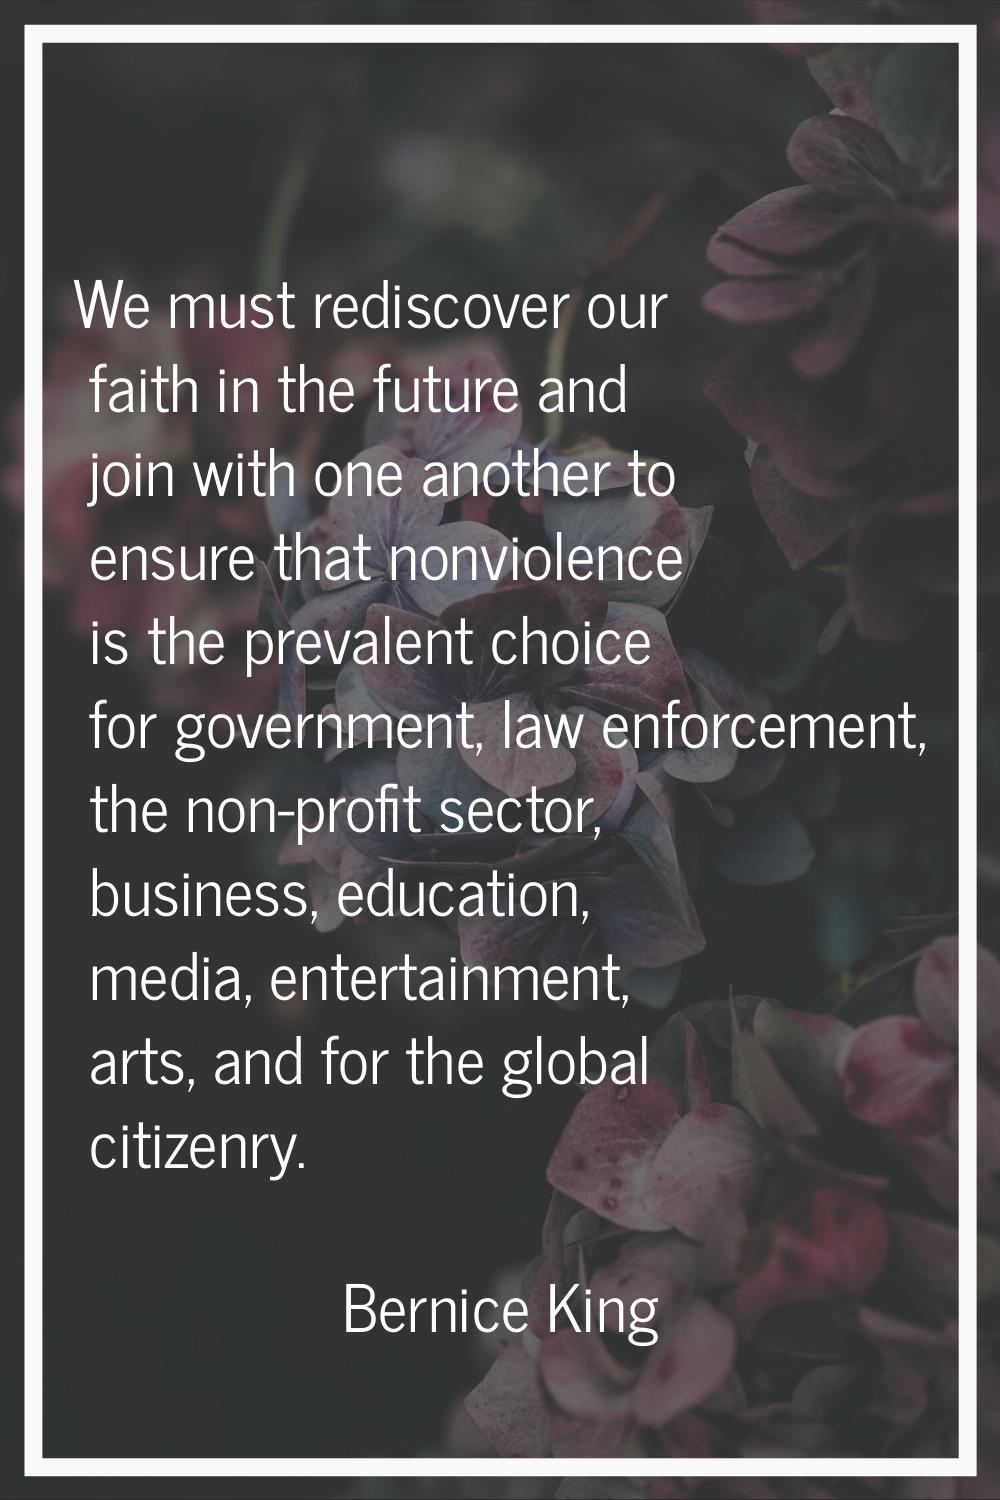 We must rediscover our faith in the future and join with one another to ensure that nonviolence is 